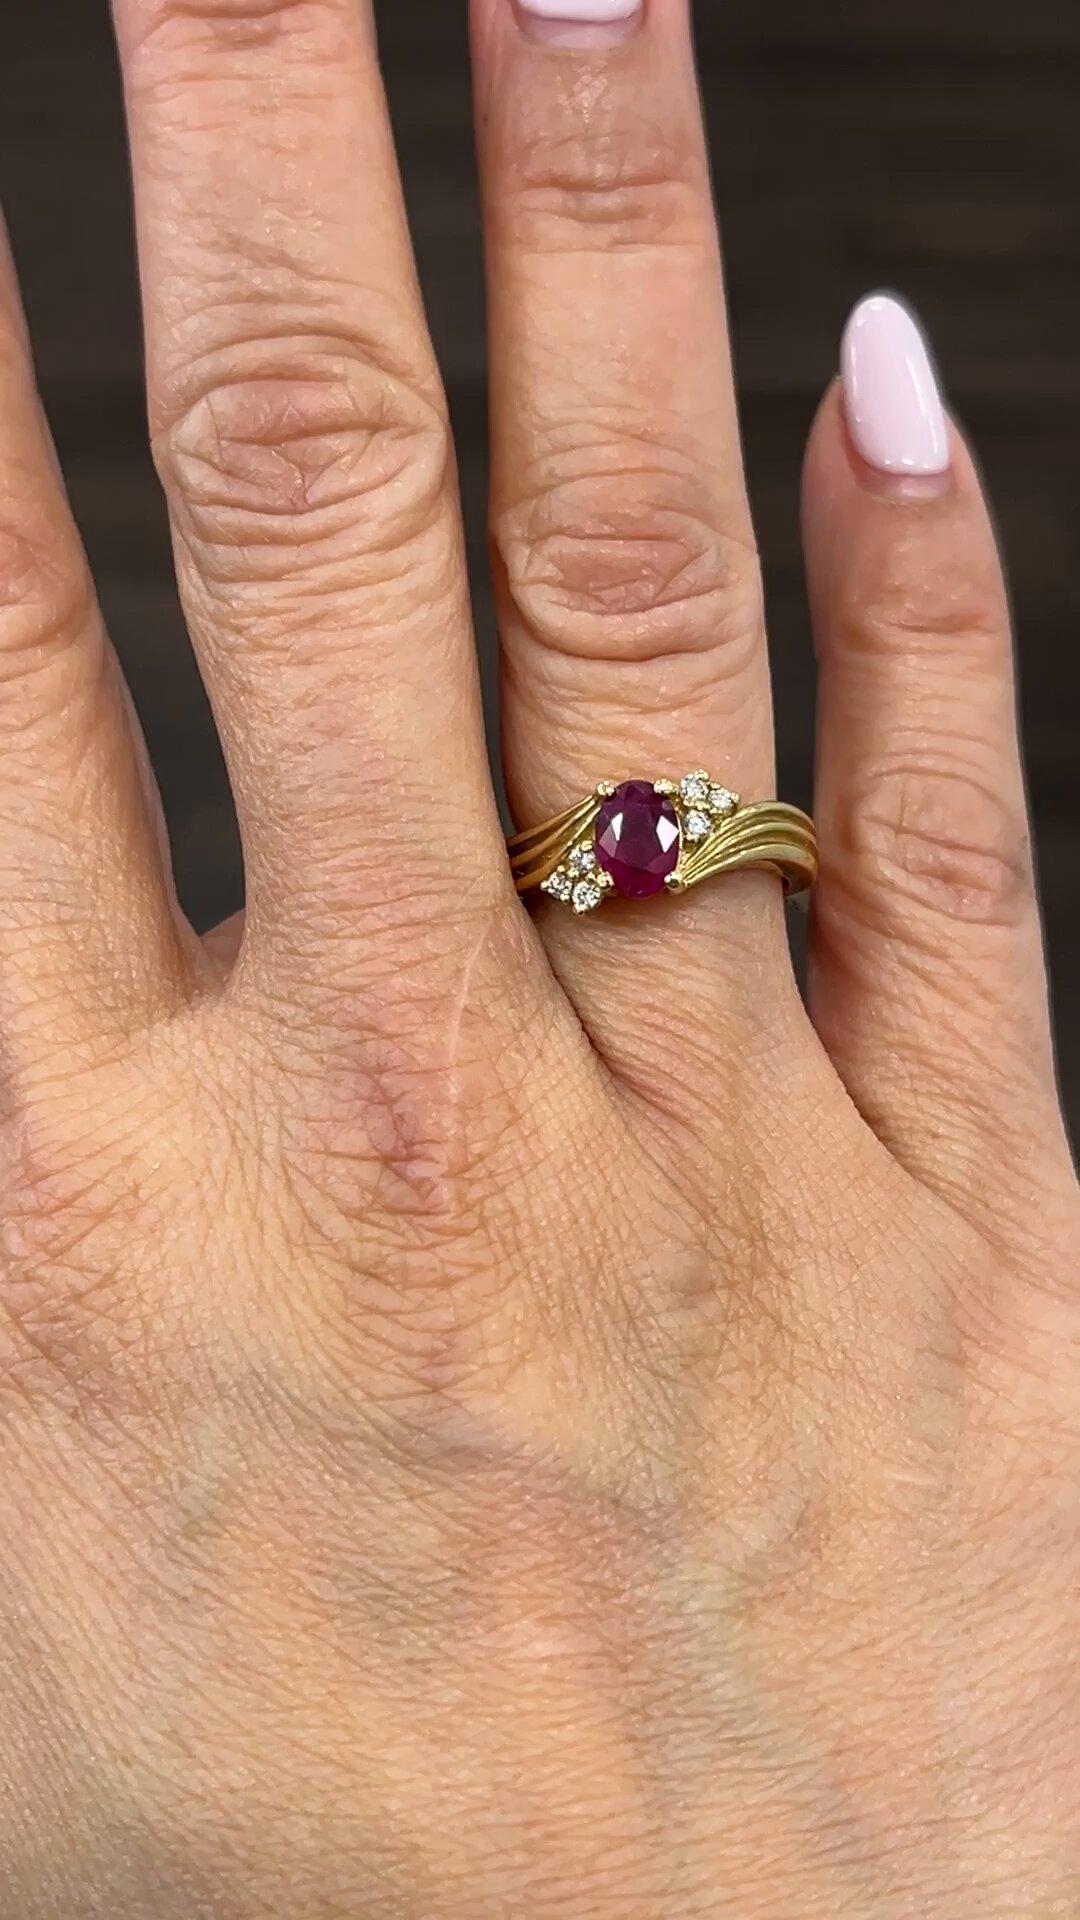 This stunning oval-shaped ring is crafted from 14k yellow gold and features a gorgeous 0.93 carat red ruby as its main stone. The ruby is accentuated by sparkling diamonds and set in an elegant design. The ring is size 5 3/4 and is made from